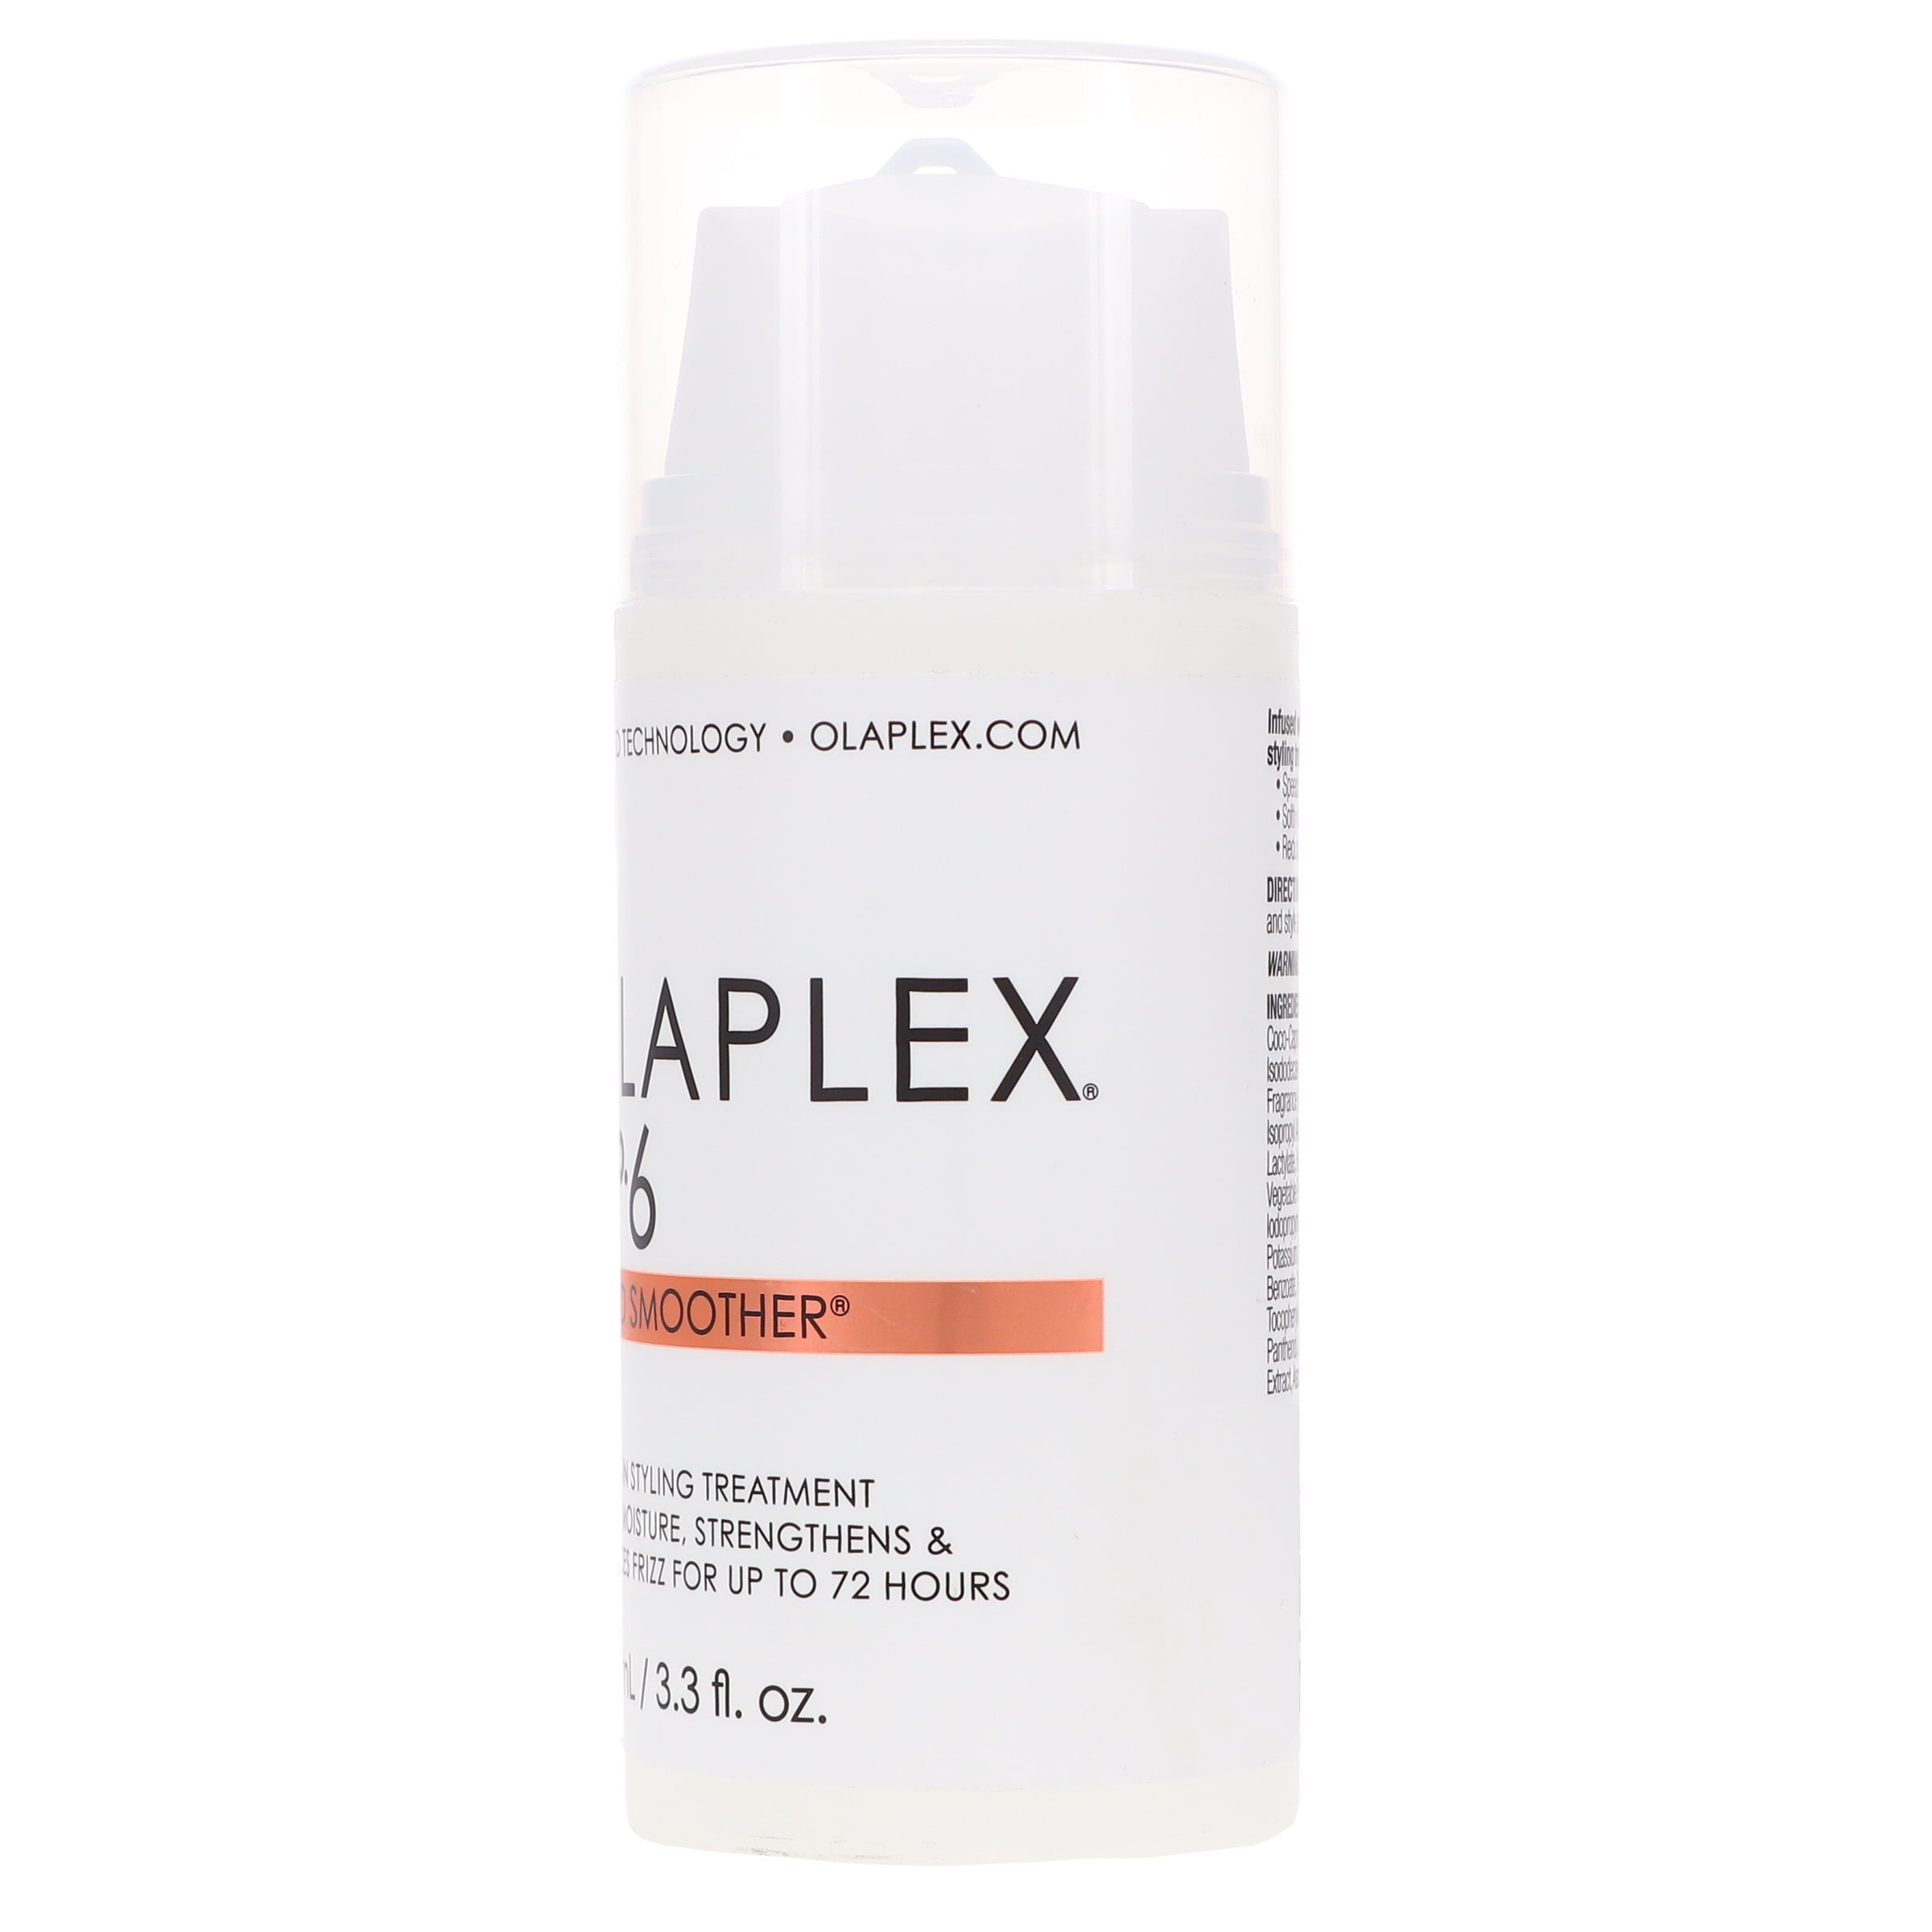 868 Studio Salon - The Olaplex#6 Bond Smoother is here! INTRO PRICE: 270.00  REG PRICE: 300.00 GET THE SPECIAL PRICE WHILST STOCKS LAST!! NO.6 BOND  SMOOTHER A leave-in reparative styling creme eliminates